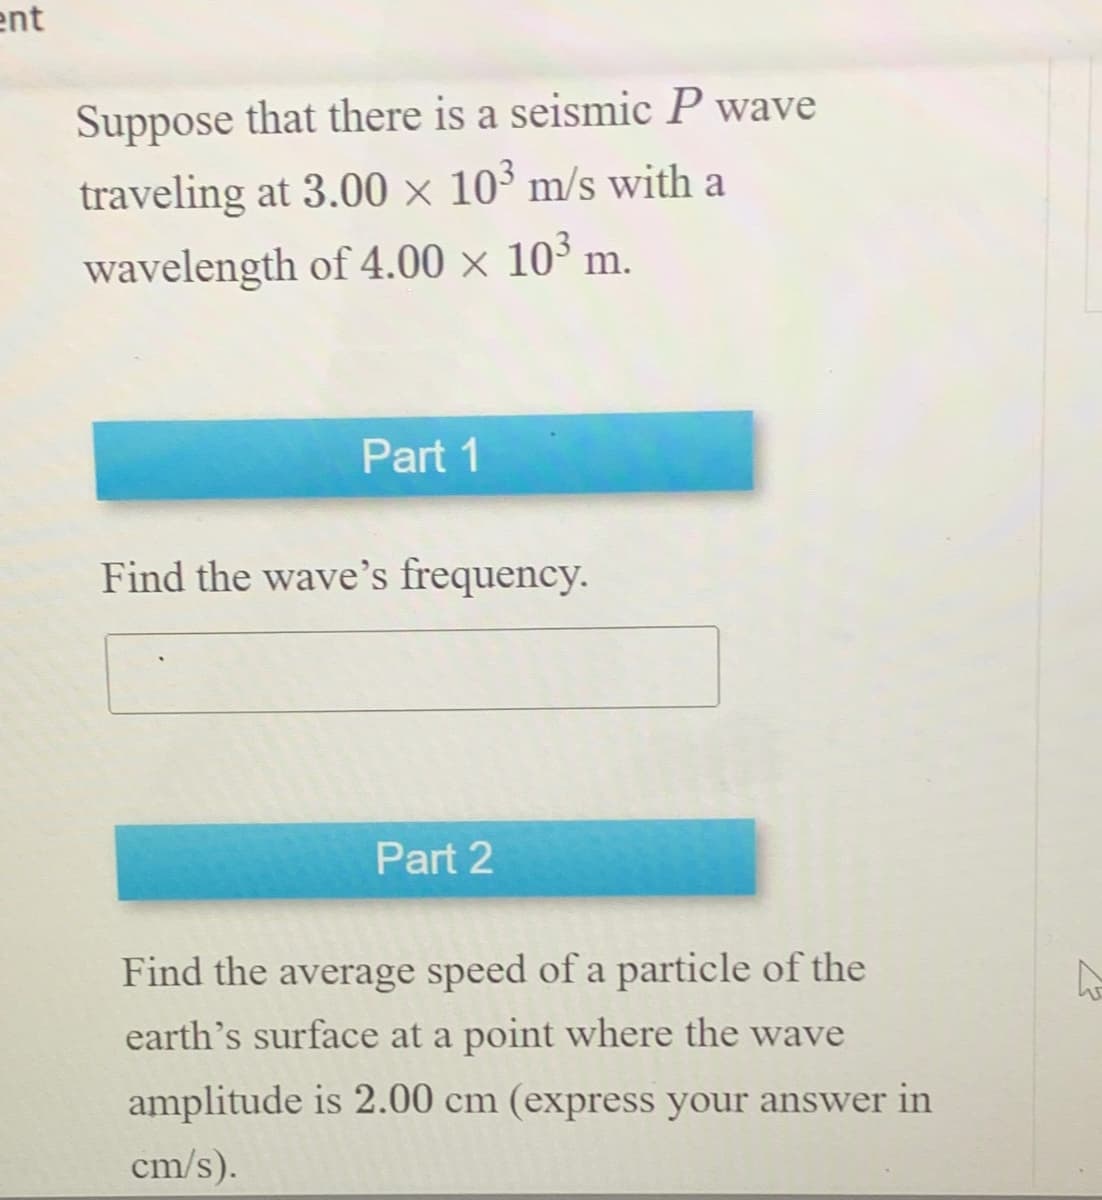 ent
Suppose that there is a seismic P wave
traveling at 3.00 × 103 m/s with a
wavelength of 4.00 × 103 m.
Part 1
Find the wave's frequency.
Part 2
Find the average speed of a particle of the
earth's surface at a point where the wave
amplitude is 2.00 cm (express your answer in
cm/s).